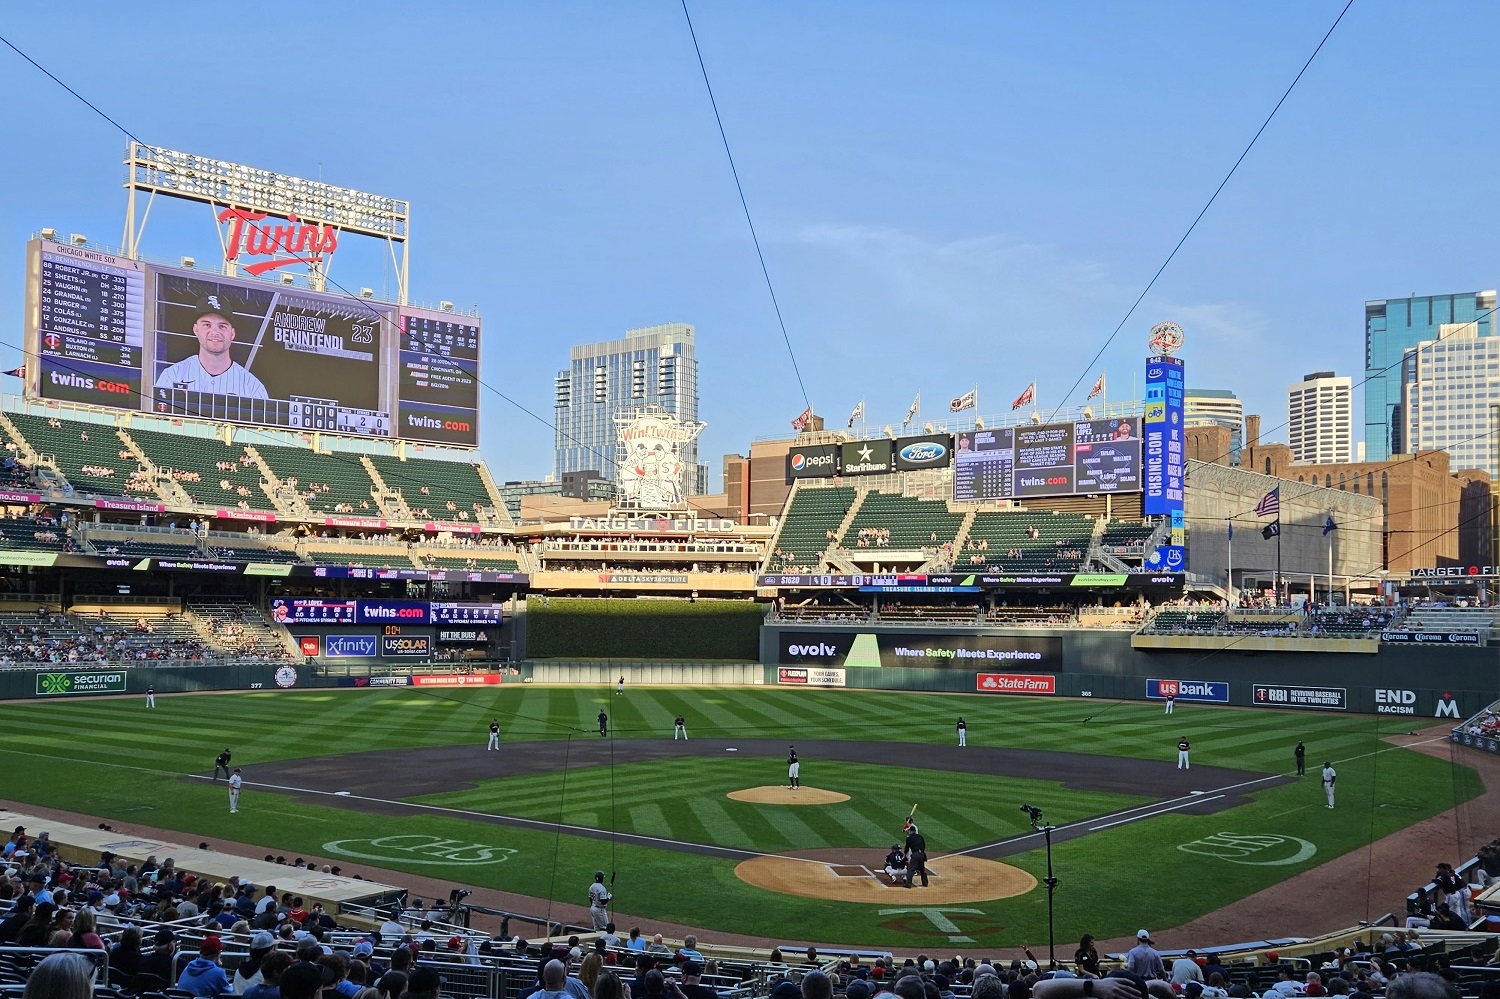 At Target Field, before 'Play Ball,' there are just a few thousand